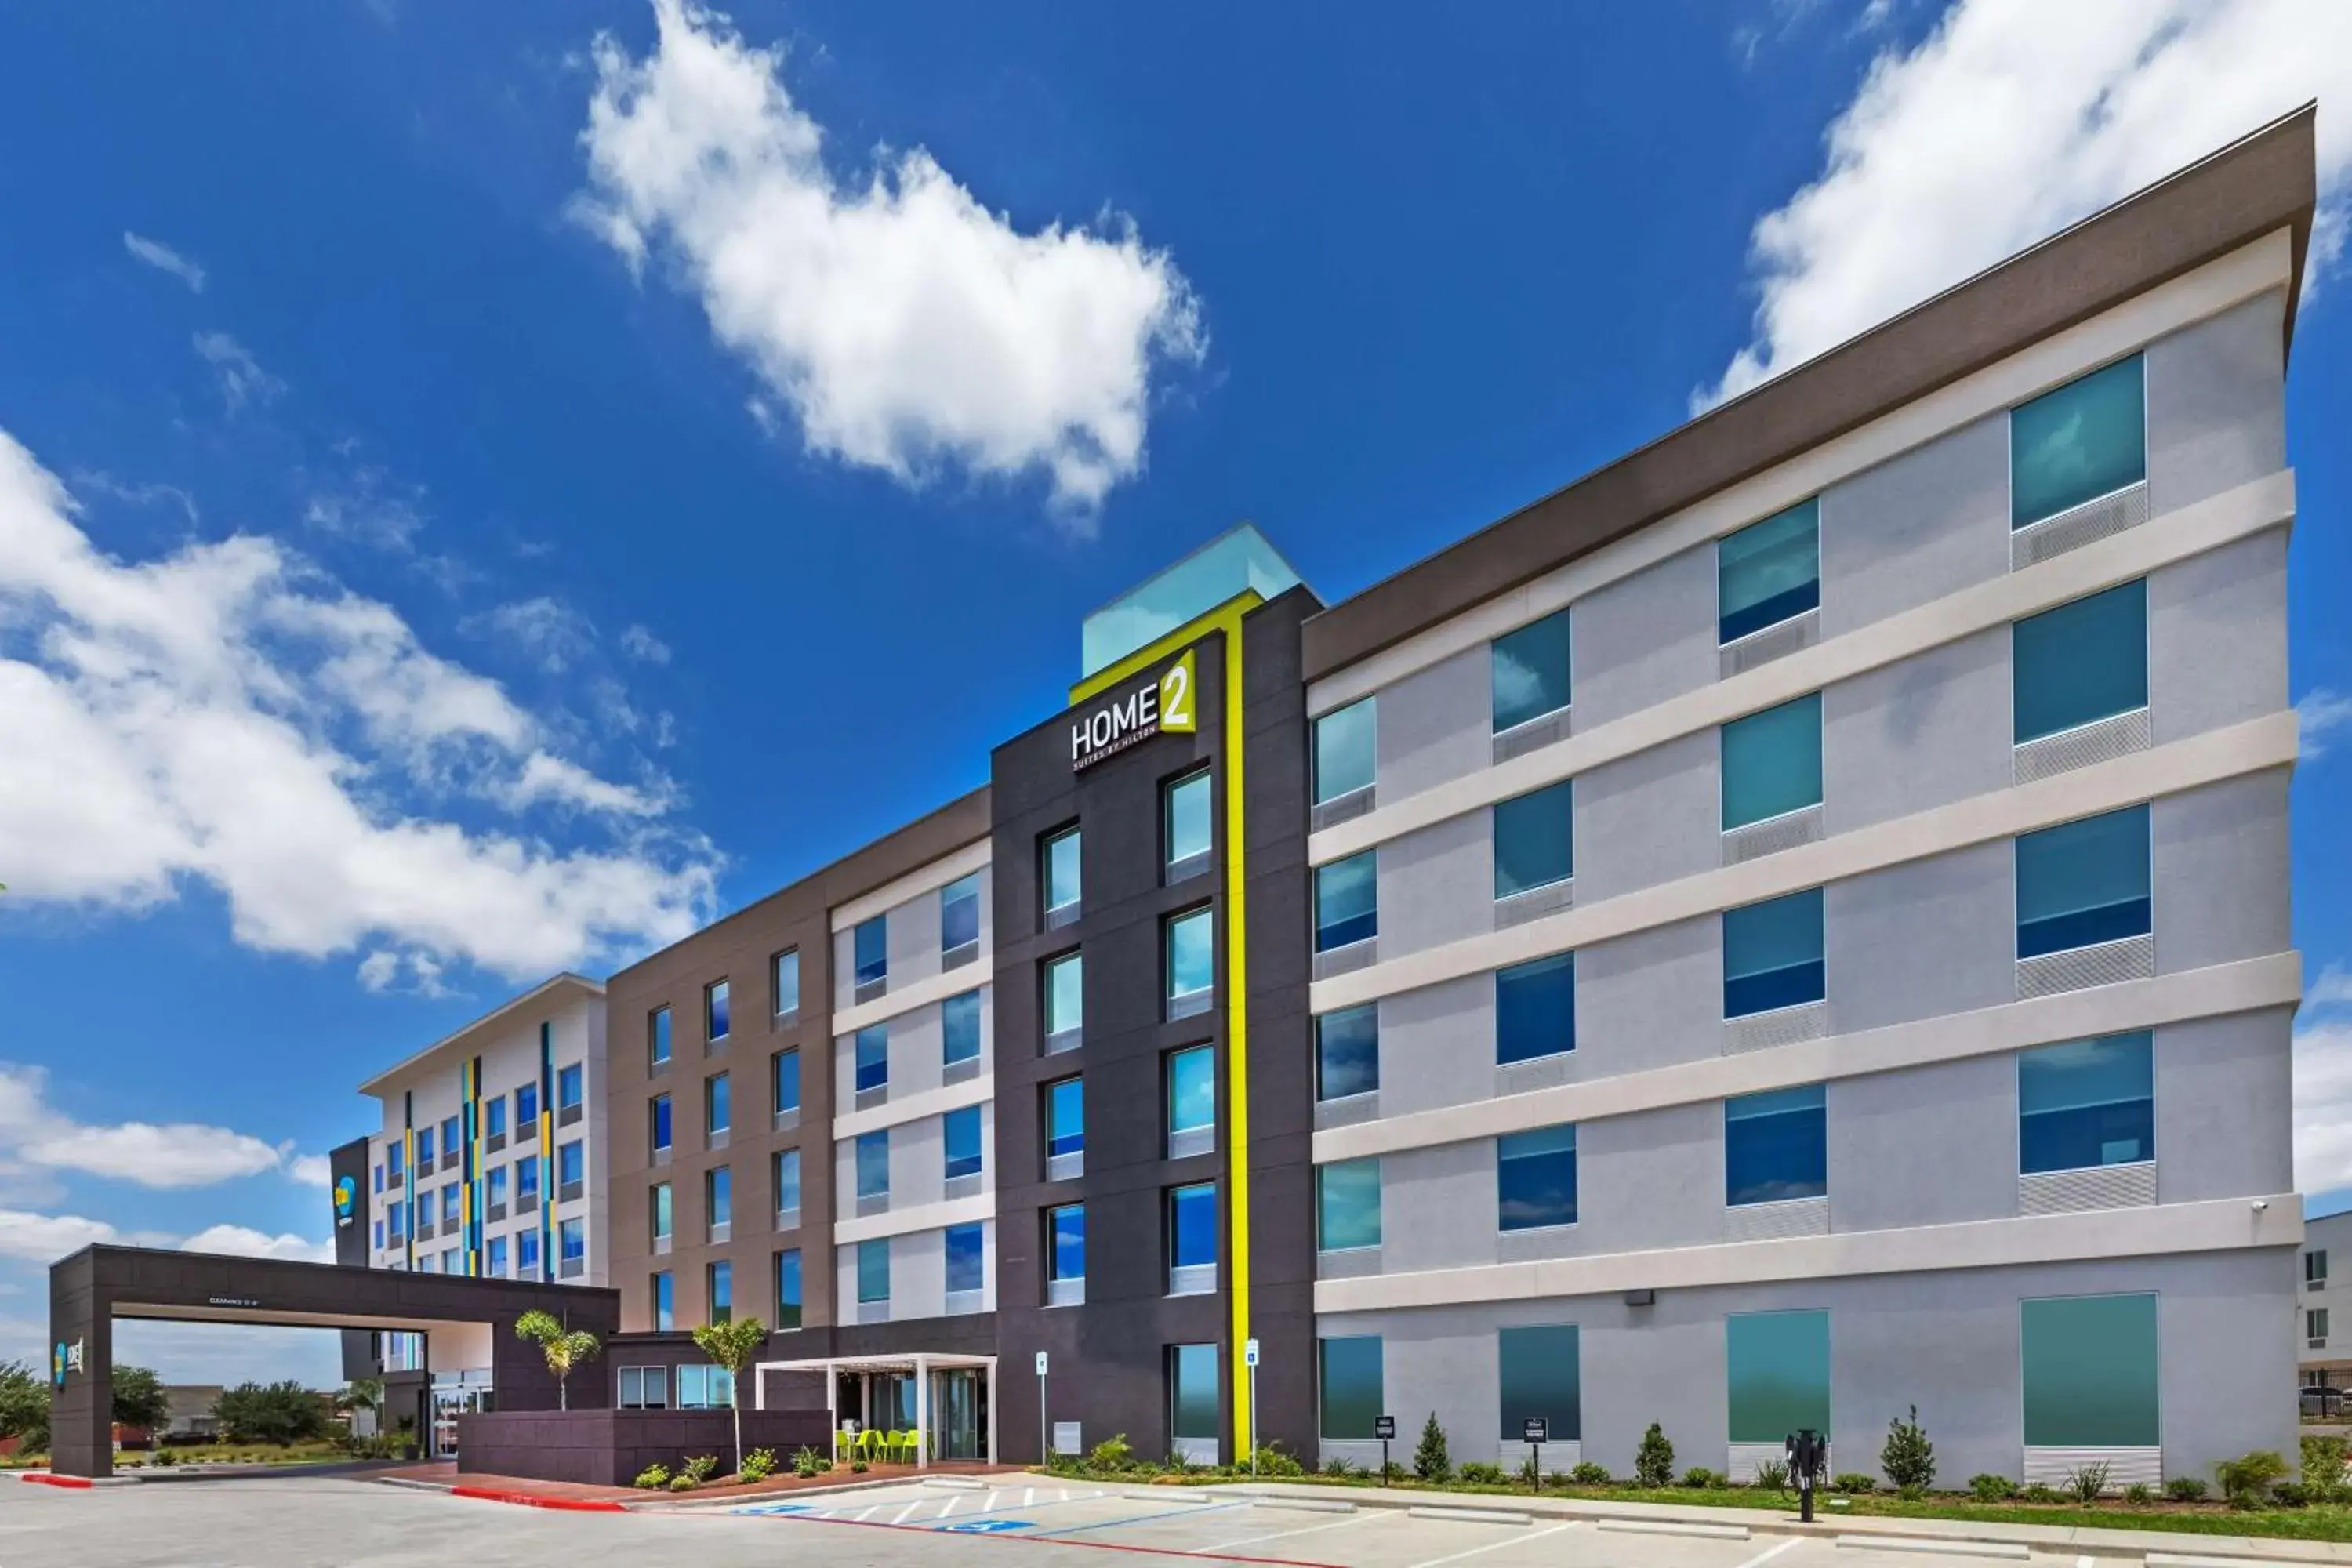 Property Building in Home2 Suites by Hilton Laredo, TX